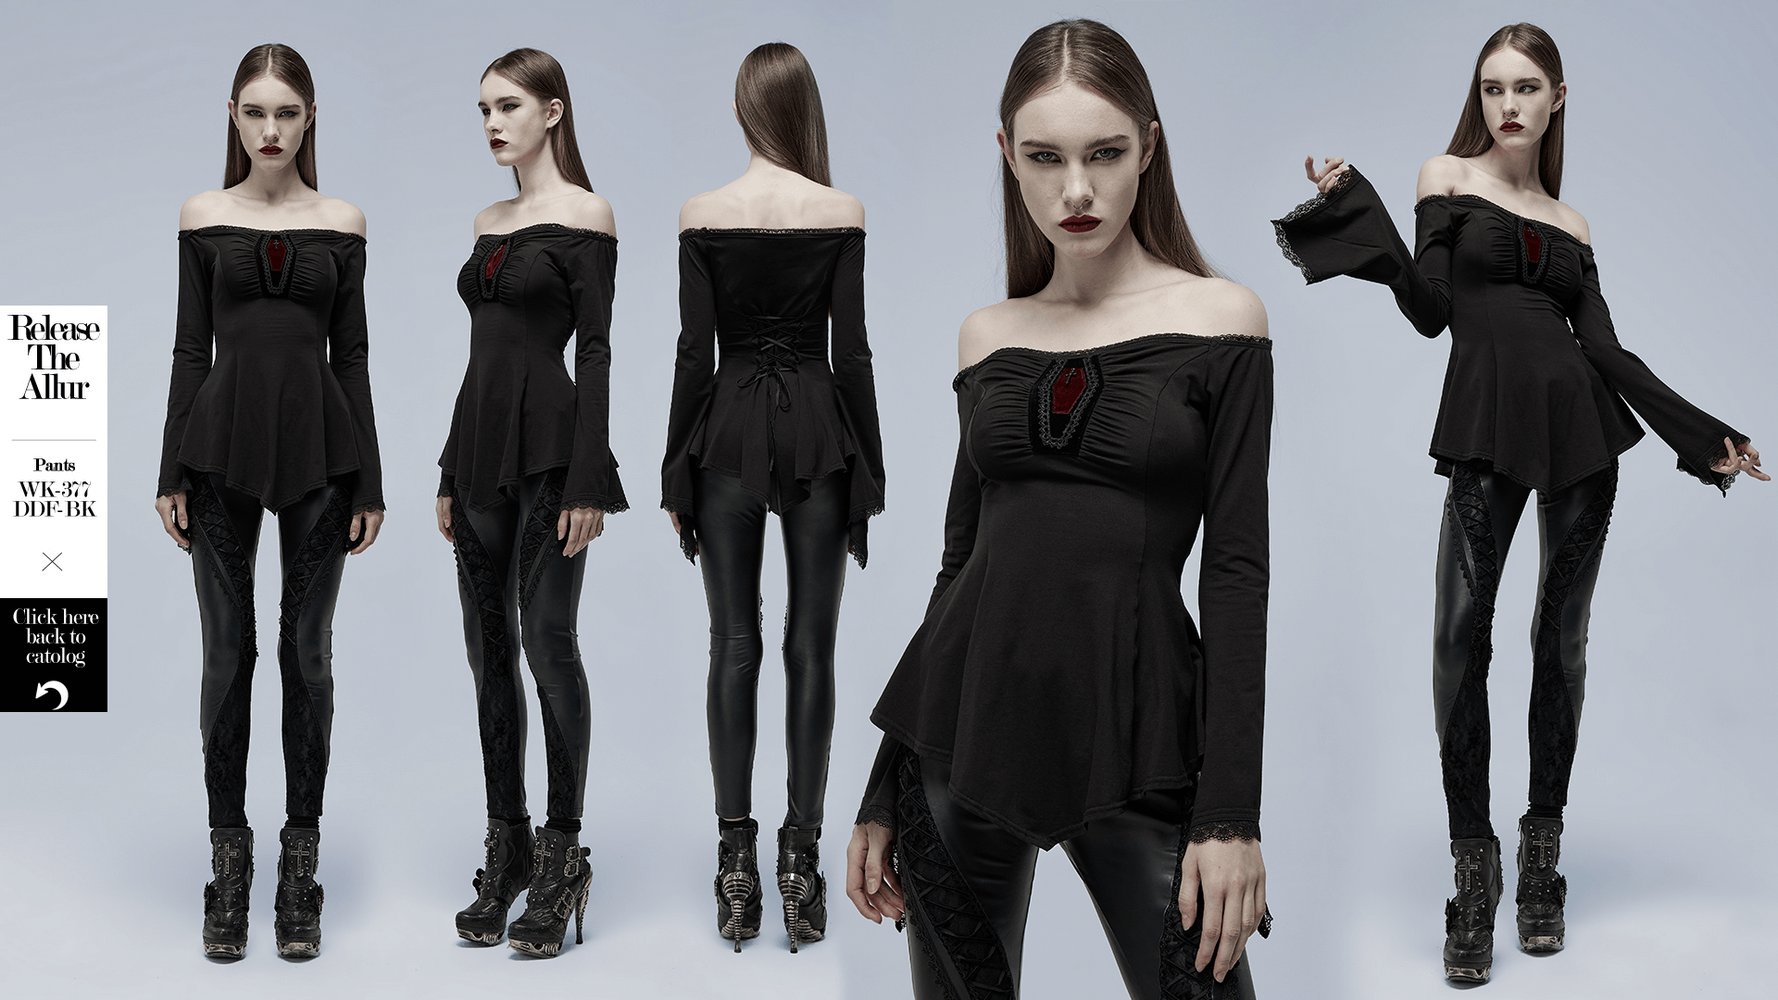 Elegant Bell-Sleeves Coffin Accent Goth Top for Women - HARD'N'HEAVY